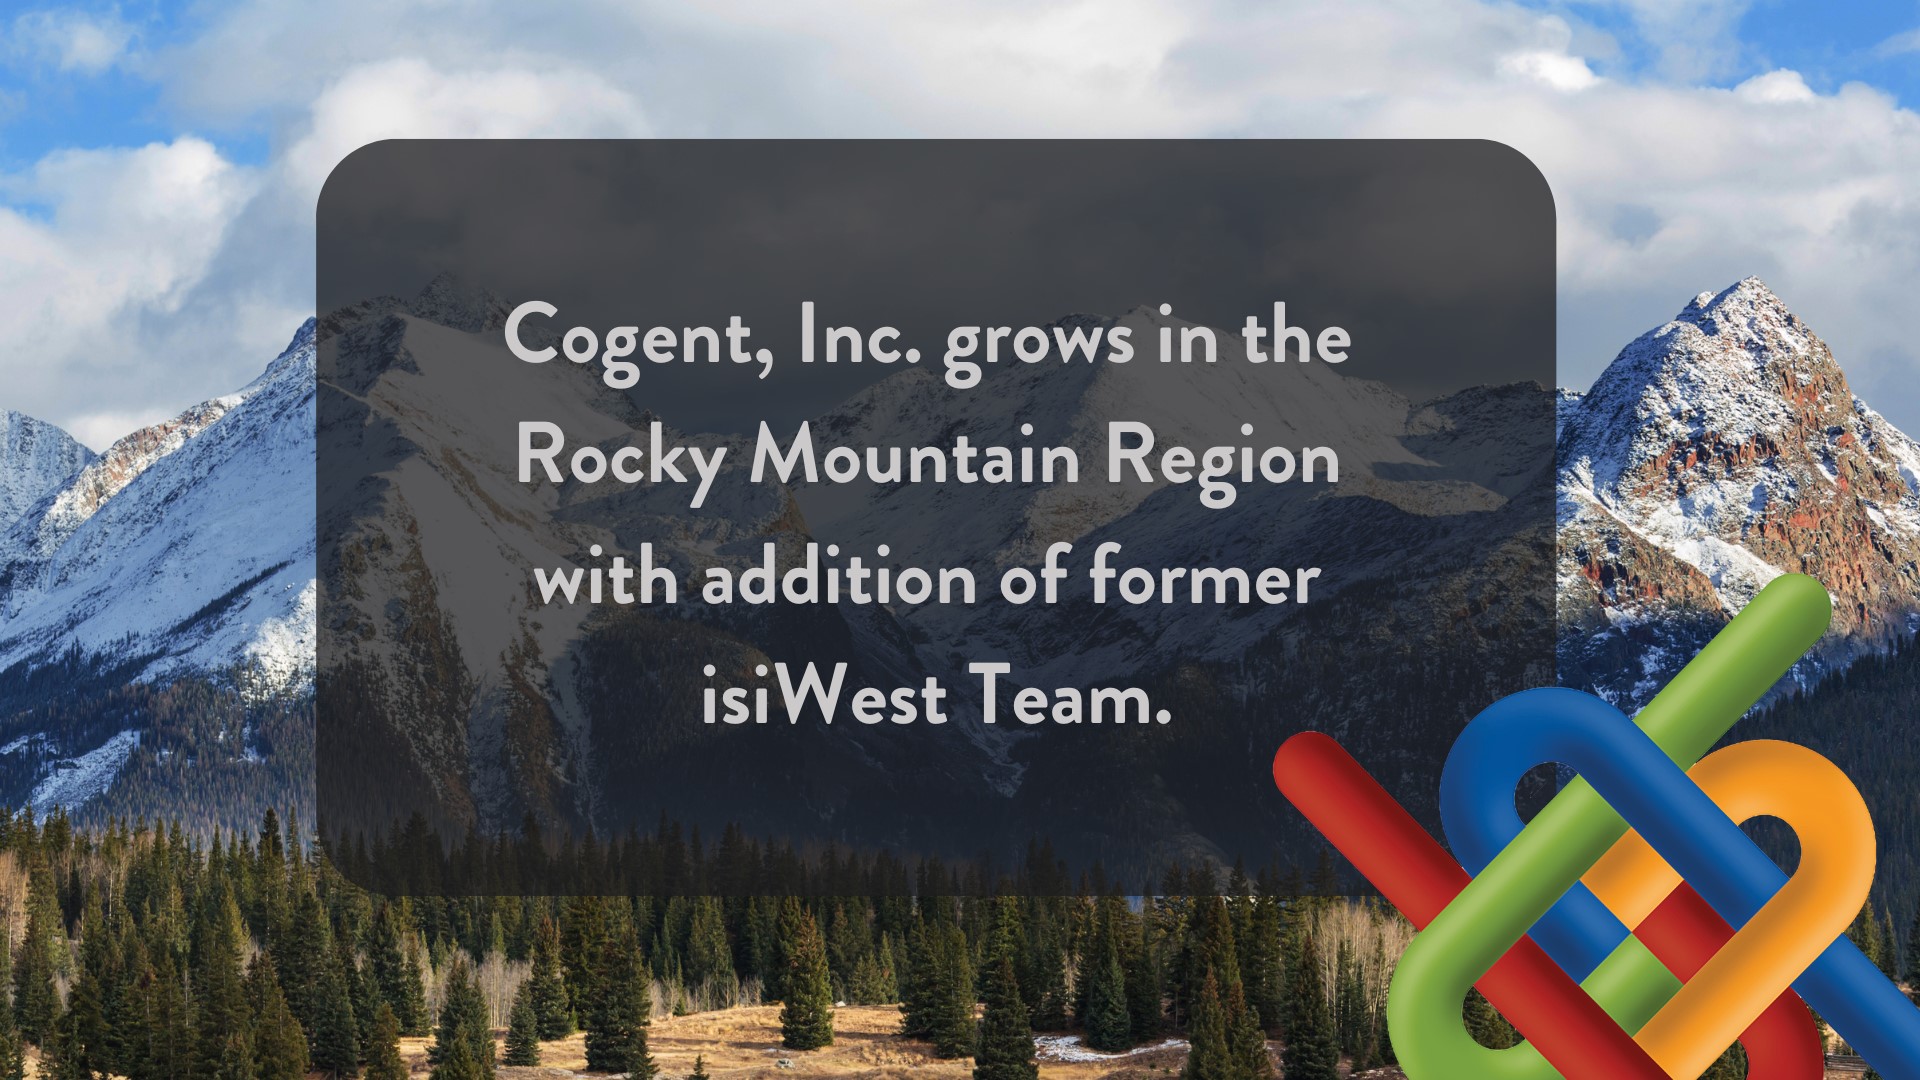 Cogent, Inc. grows in the Rocky Mountain Region  with addition of former isiWest Team.